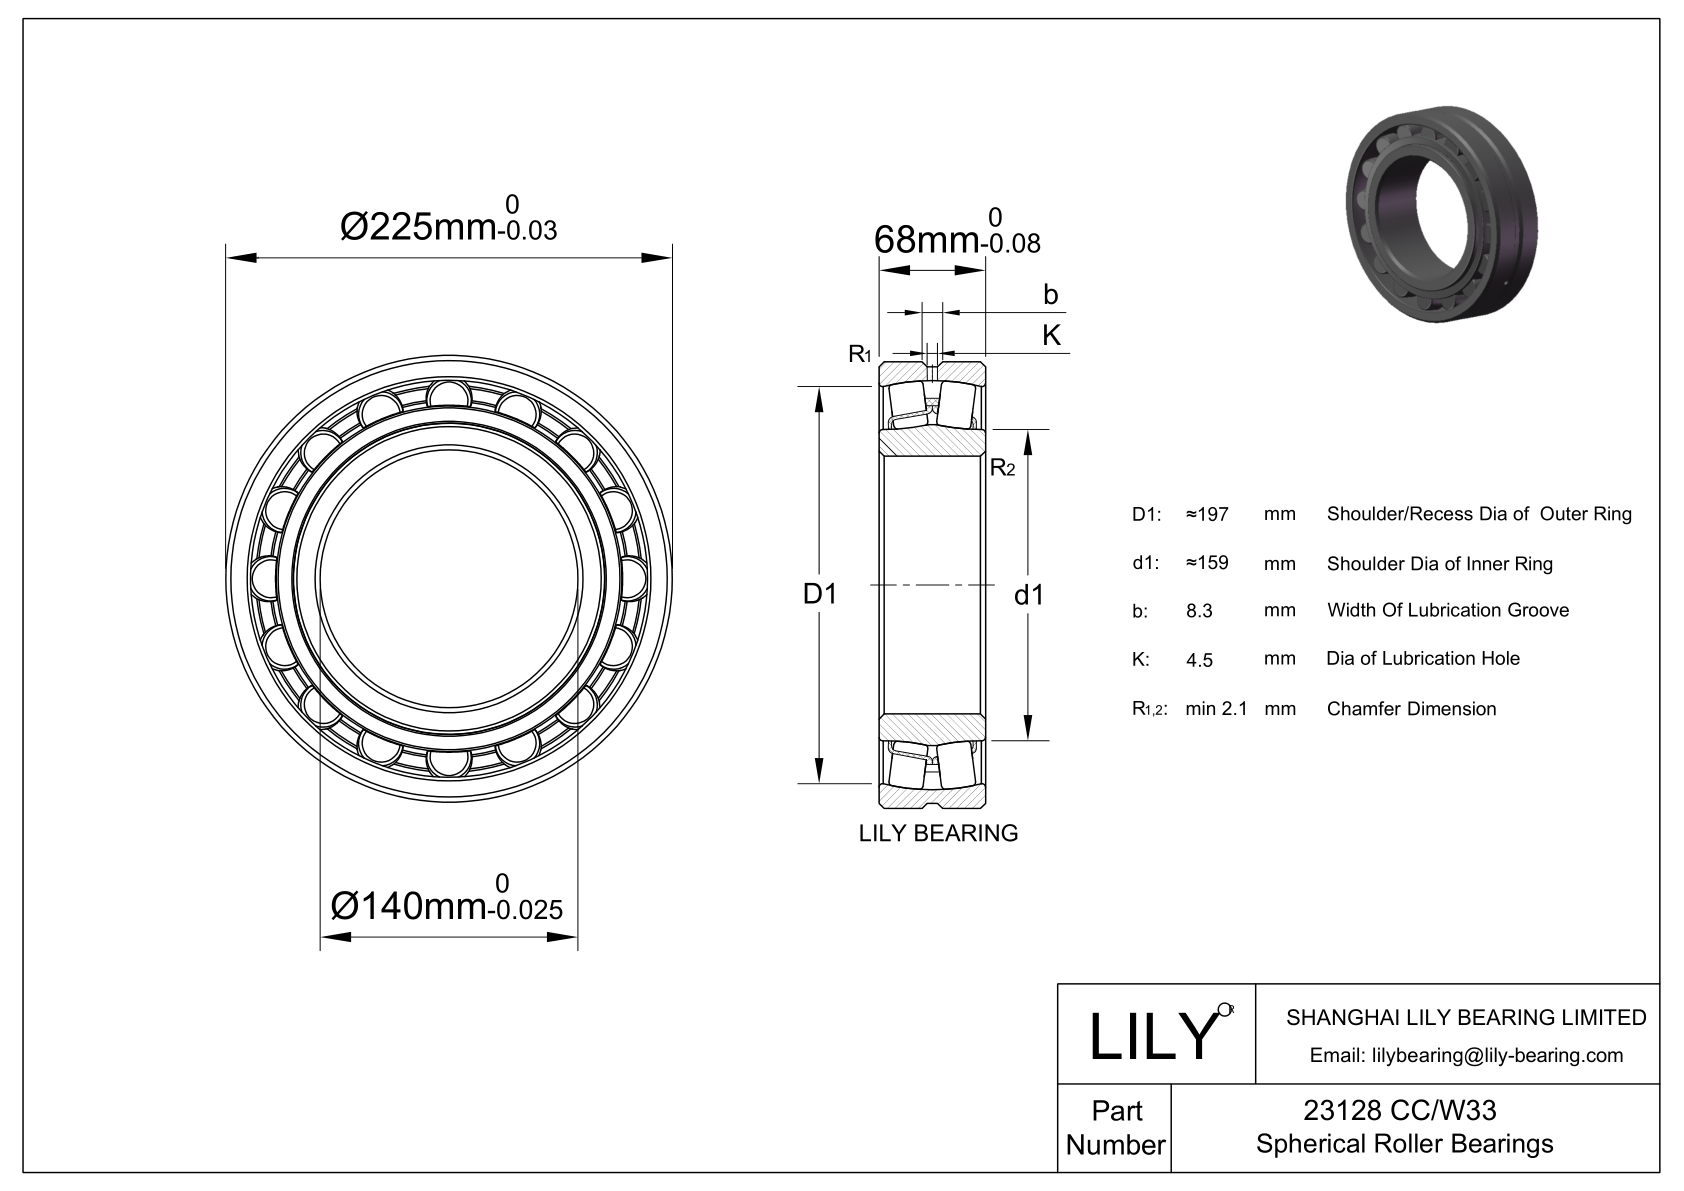 23128 CC/W33 Double Row Spherical Roller Bearing cad drawing